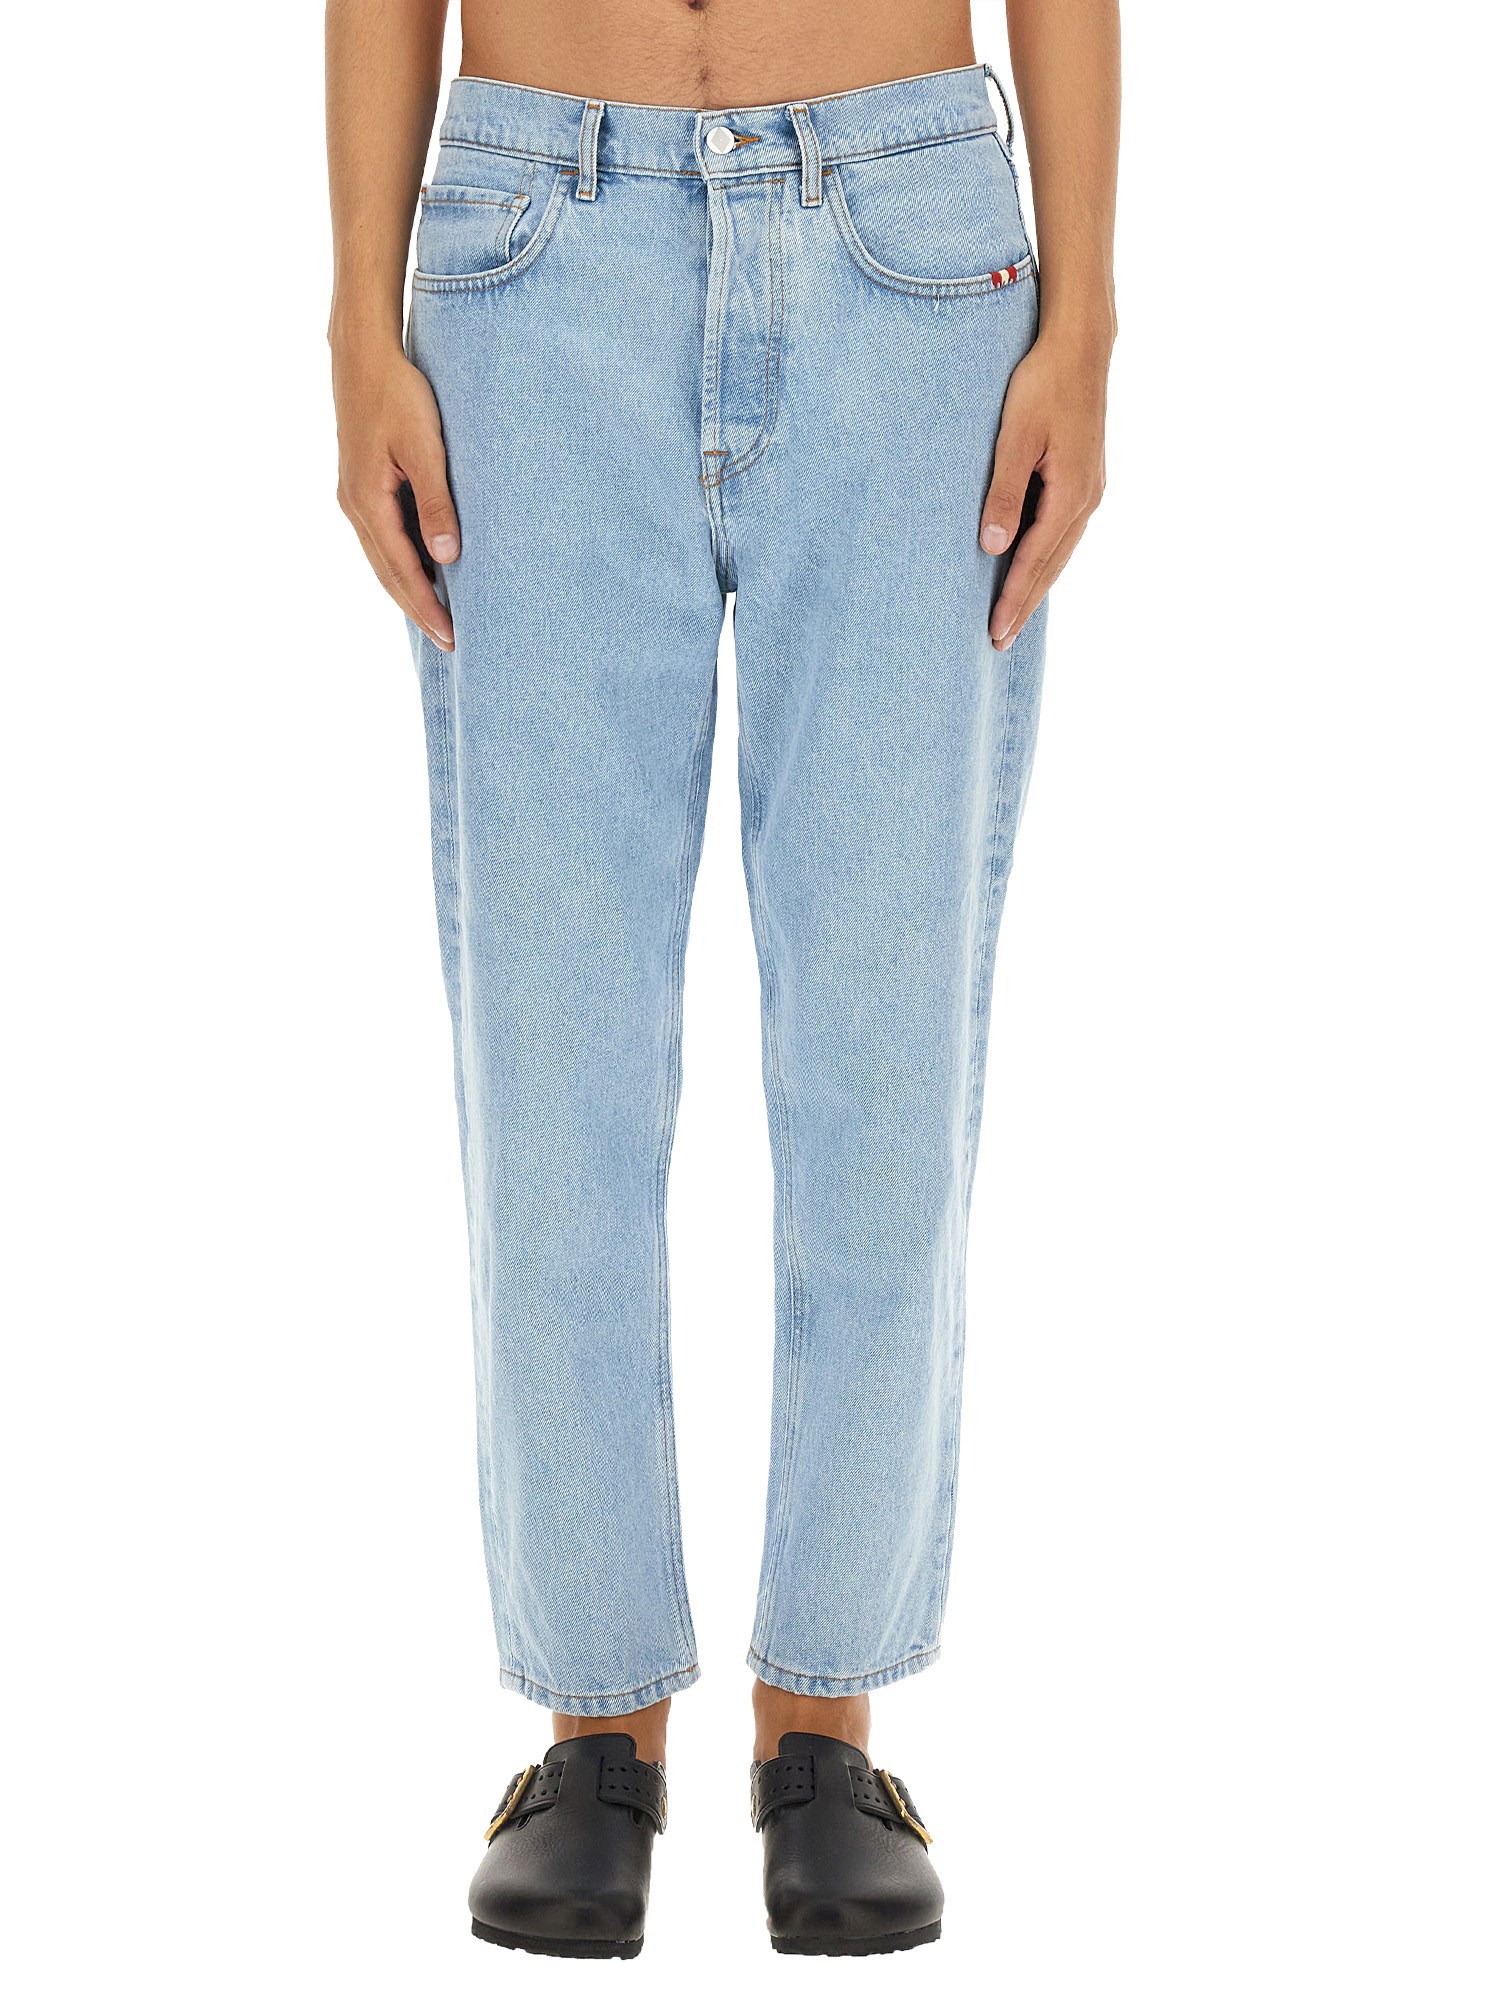 Amish amish eremiah bleached jeans